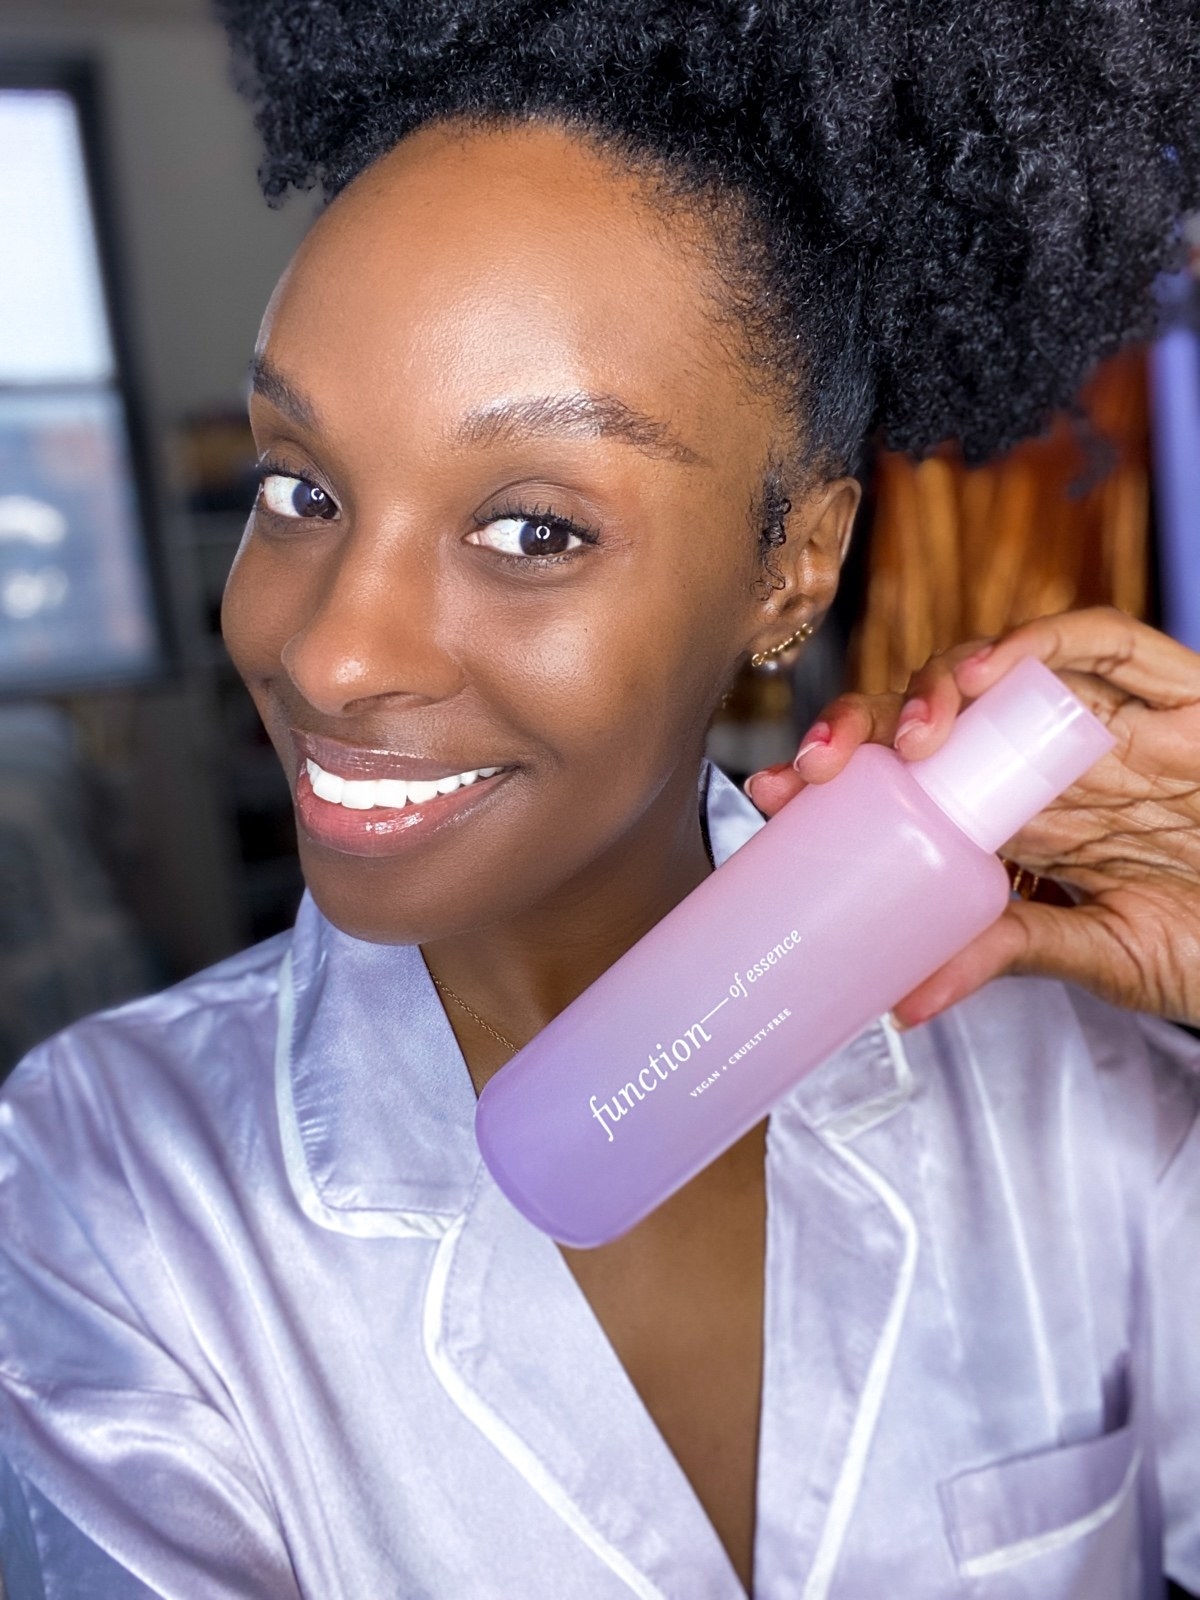 Essence with her customized Function of Beauty facial cleanser.